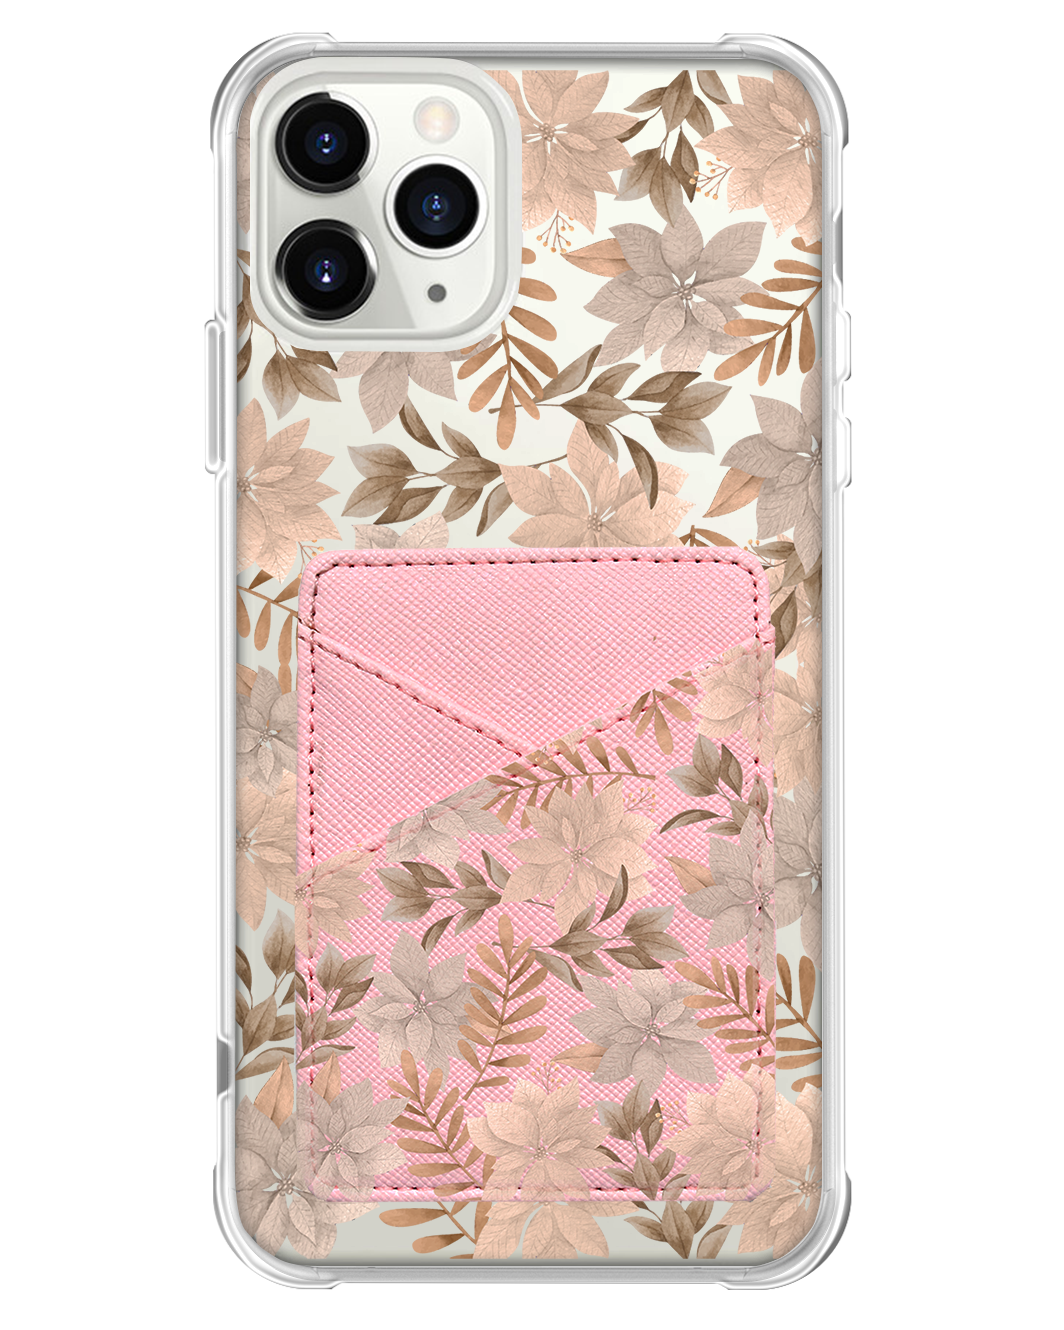 iPhone Phone Wallet Case - Rustic Lily